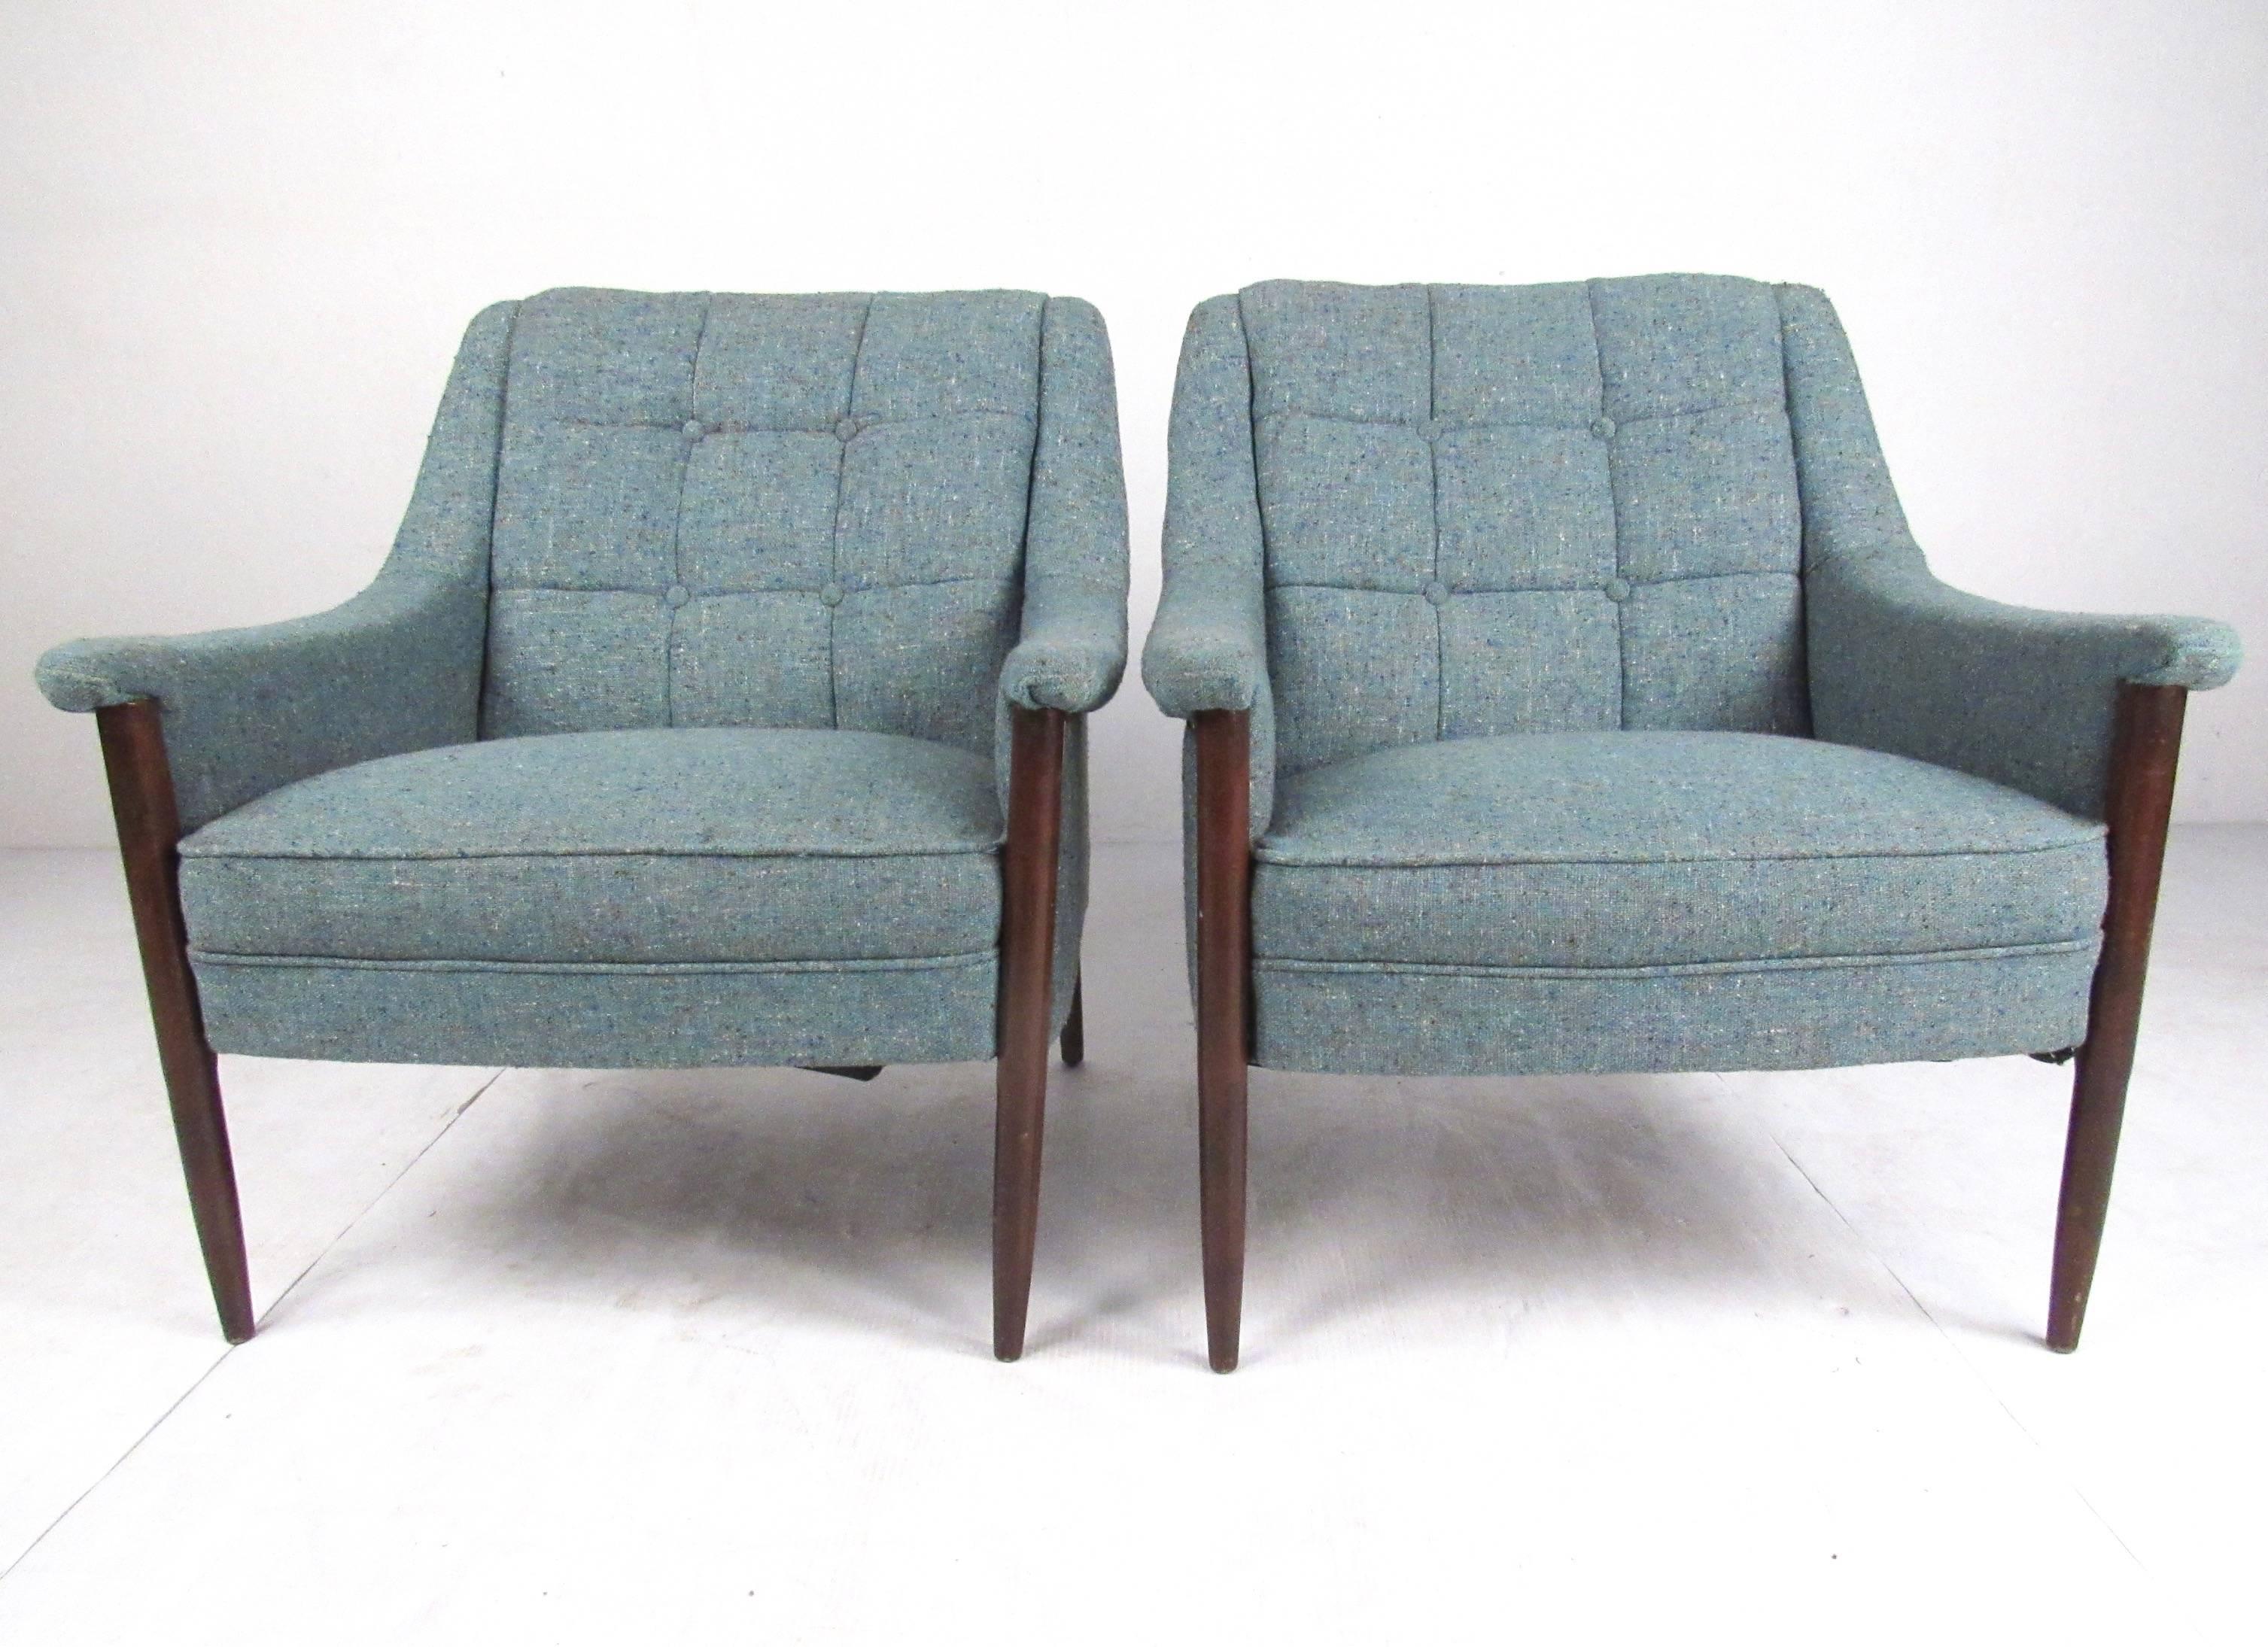 This pair of vintage modern lounge chairs feature walnut frames, shapely Danish Modern seat design, and tufted vintage fabric. Stylish Mid-Century Modern club chairs make a comfortable retro addition to home or business seating arrangement. Please